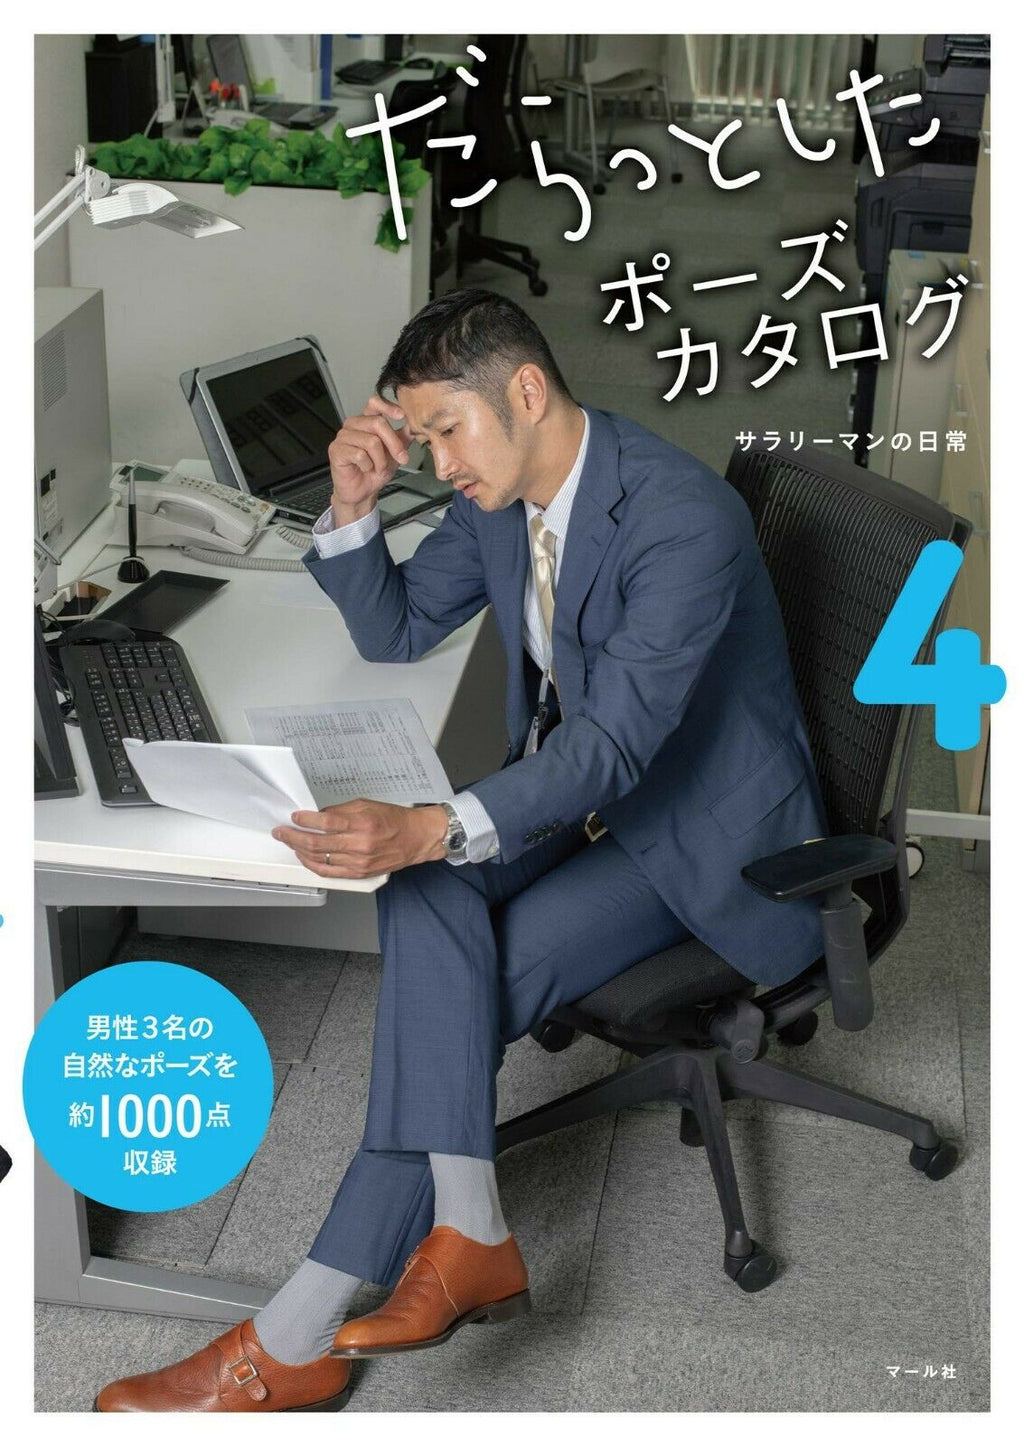 NEW' How To Draw Manga Relax Pose Book 4 Office Worker | JAPAN Art Material